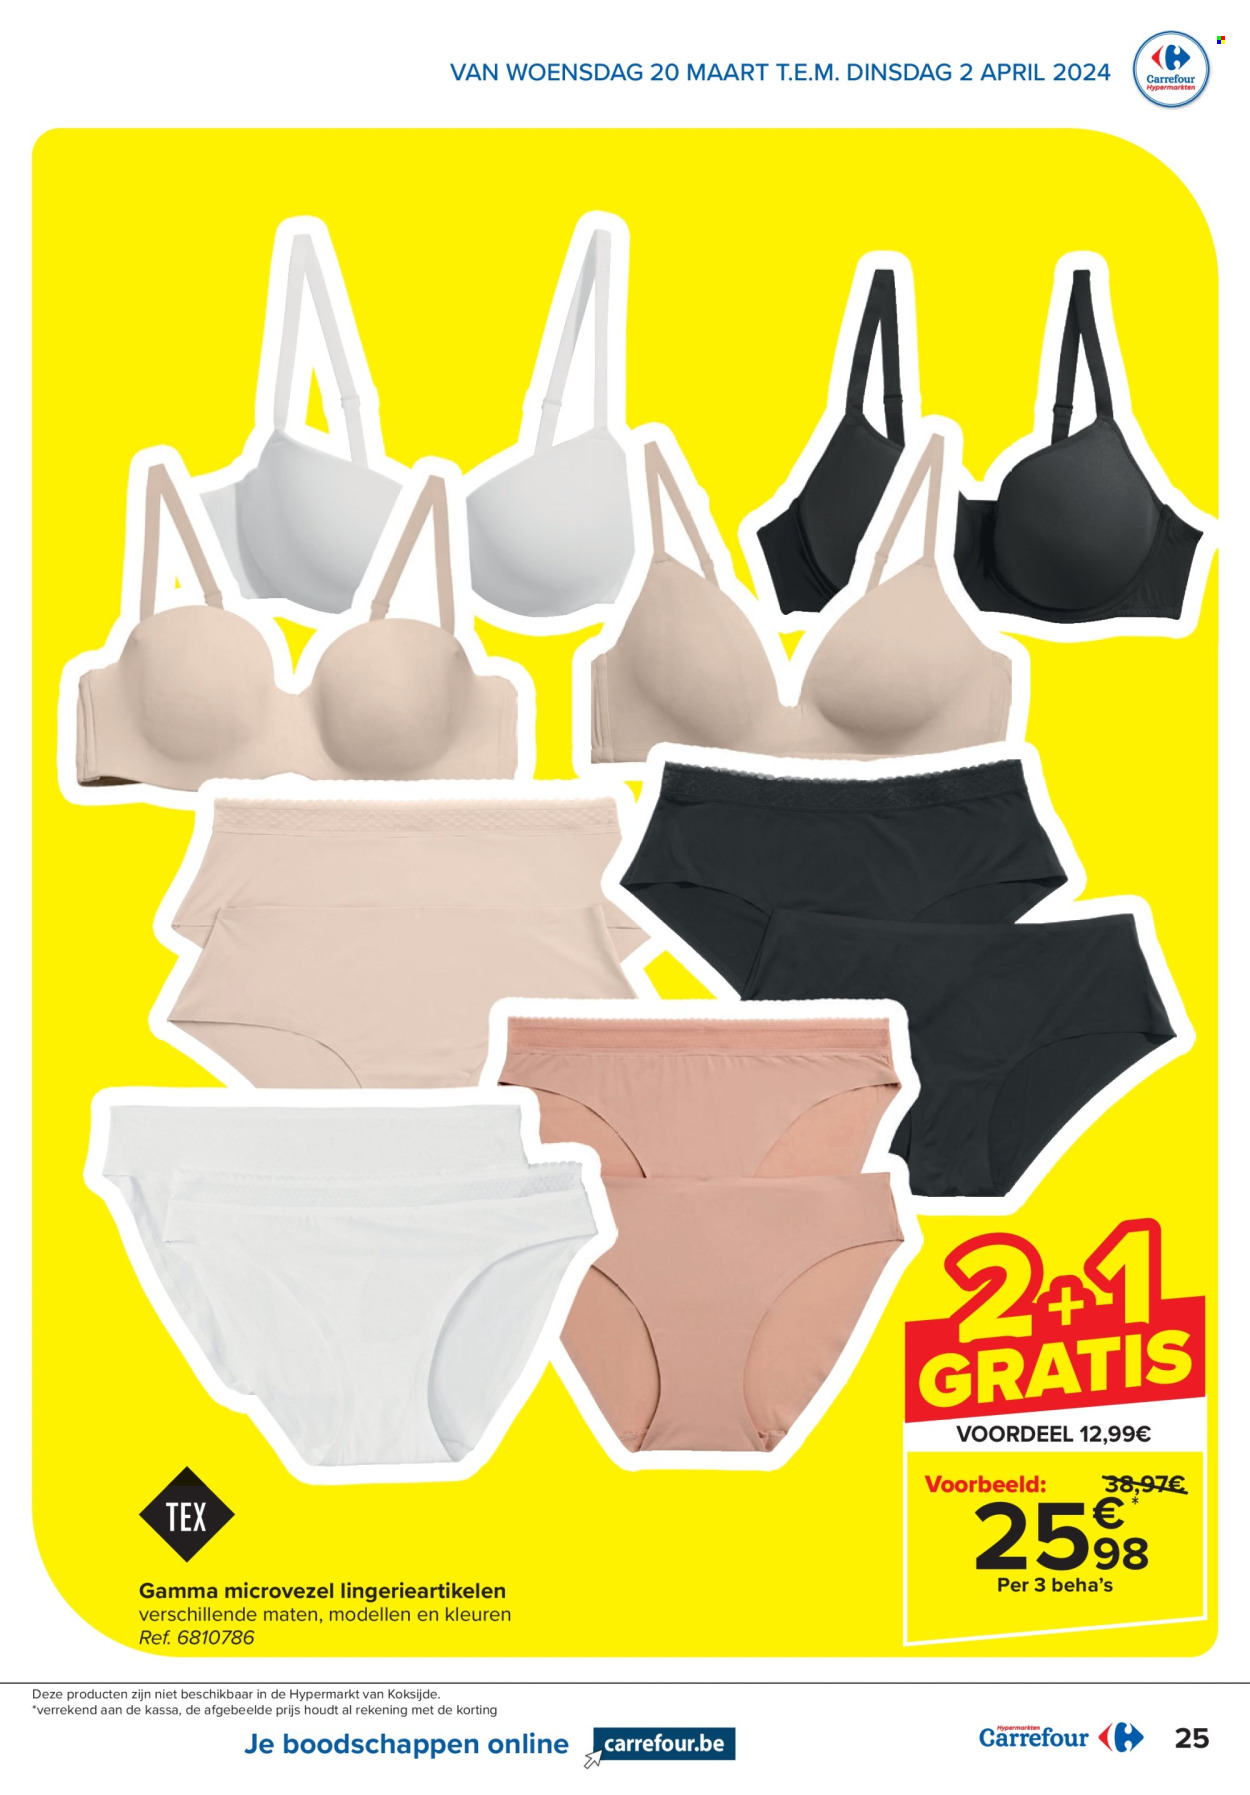 Catalogue Carrefour hypermarkt - 20.3.2024 - 2.4.2024. Page 25.